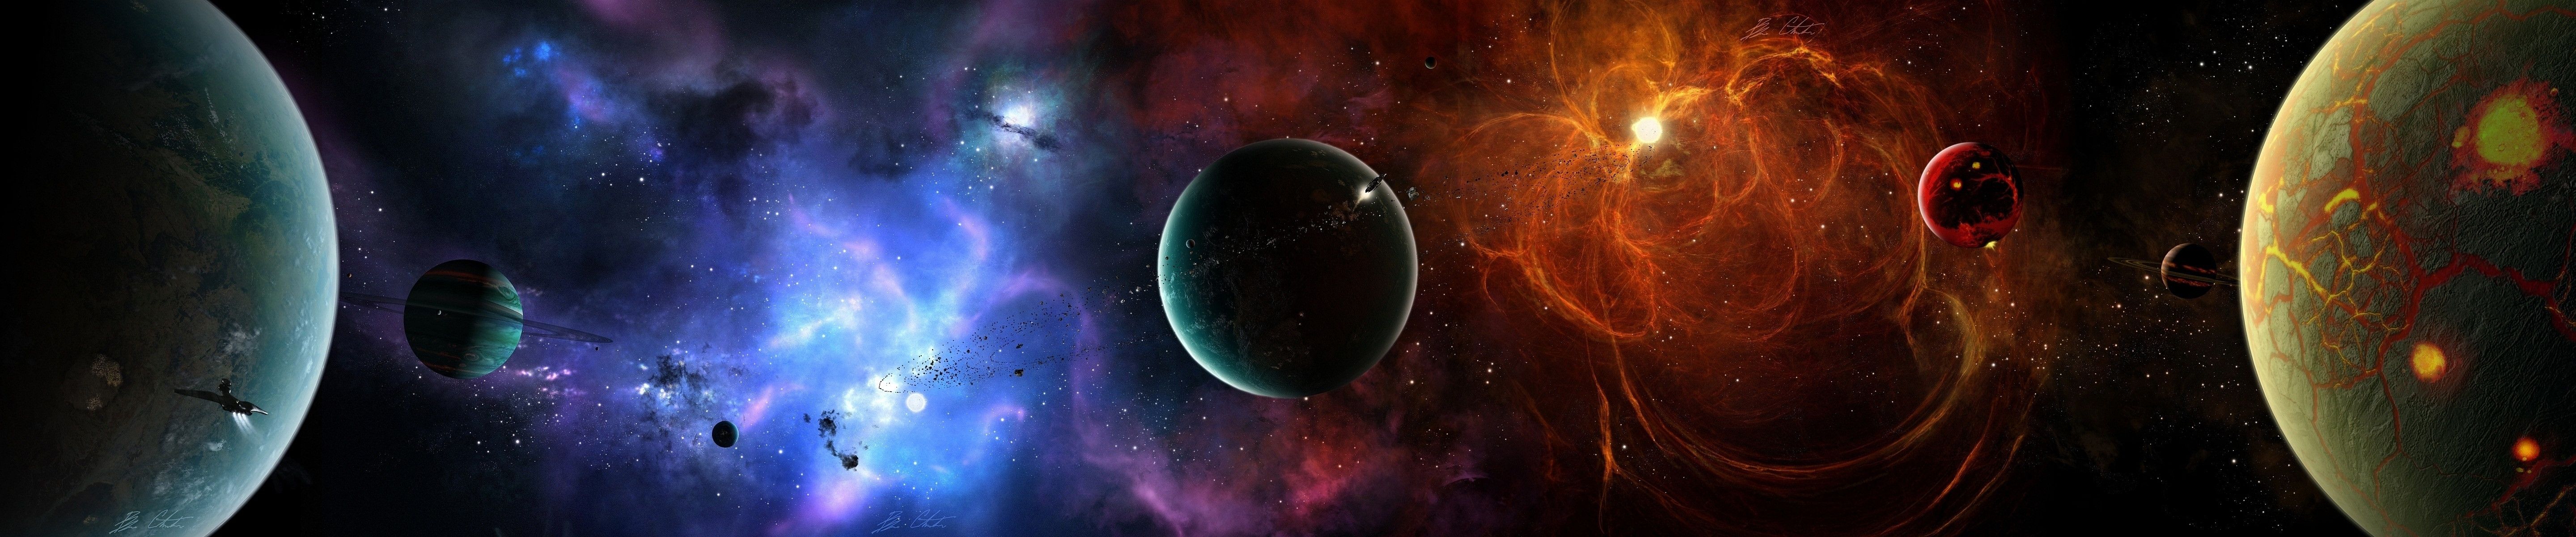 Cool Space Wallpaper (Fixed) [5760x1200]